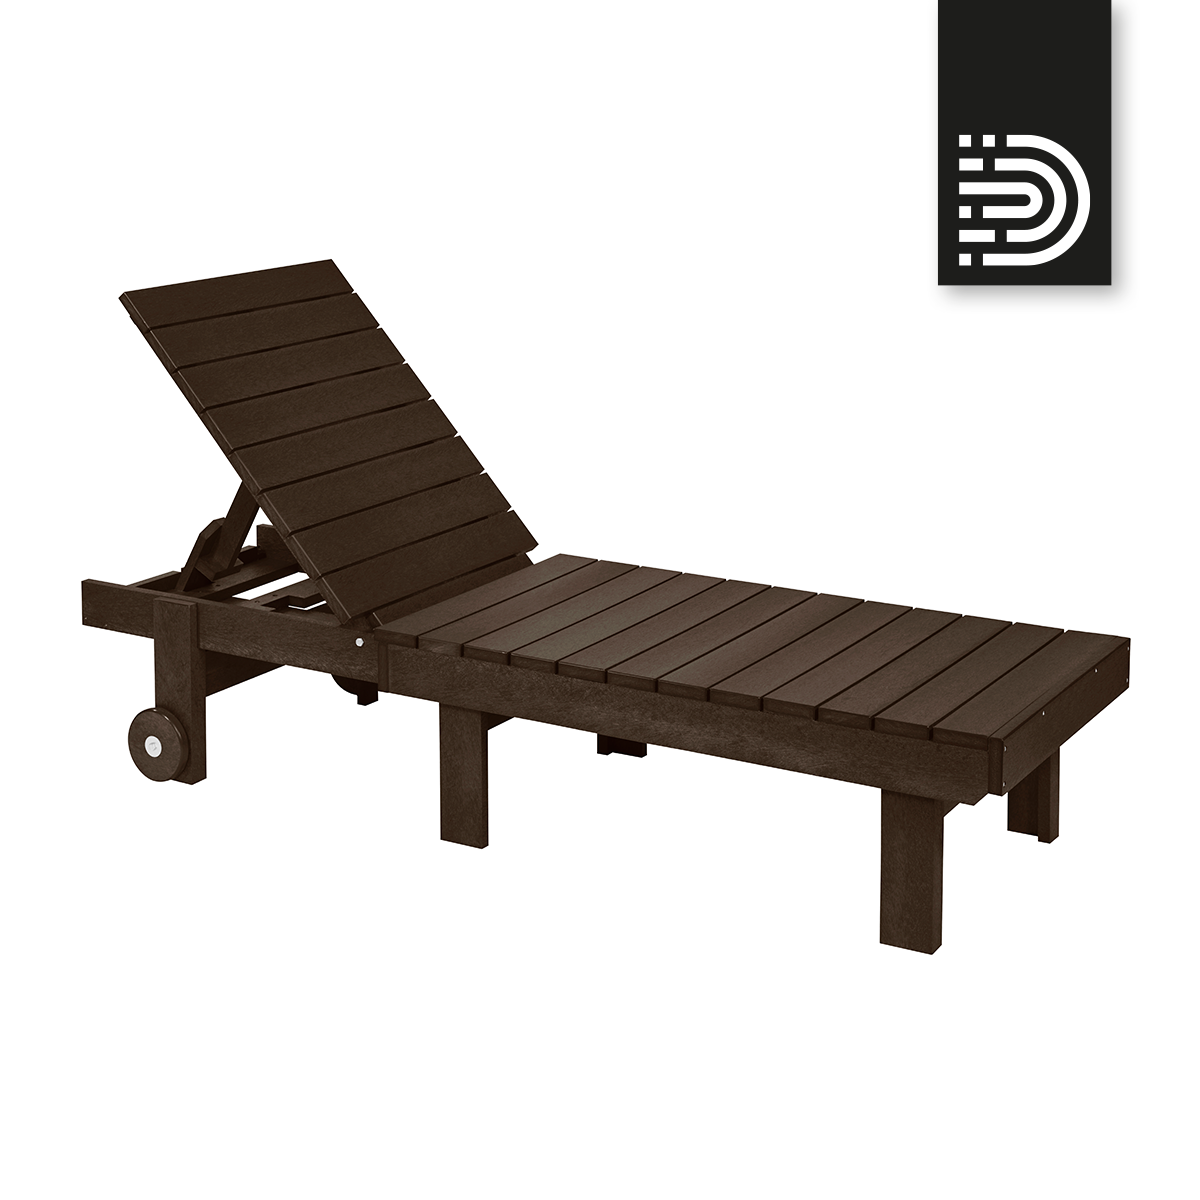 L78 Chaise Lounge with Wheels - chocolate 16